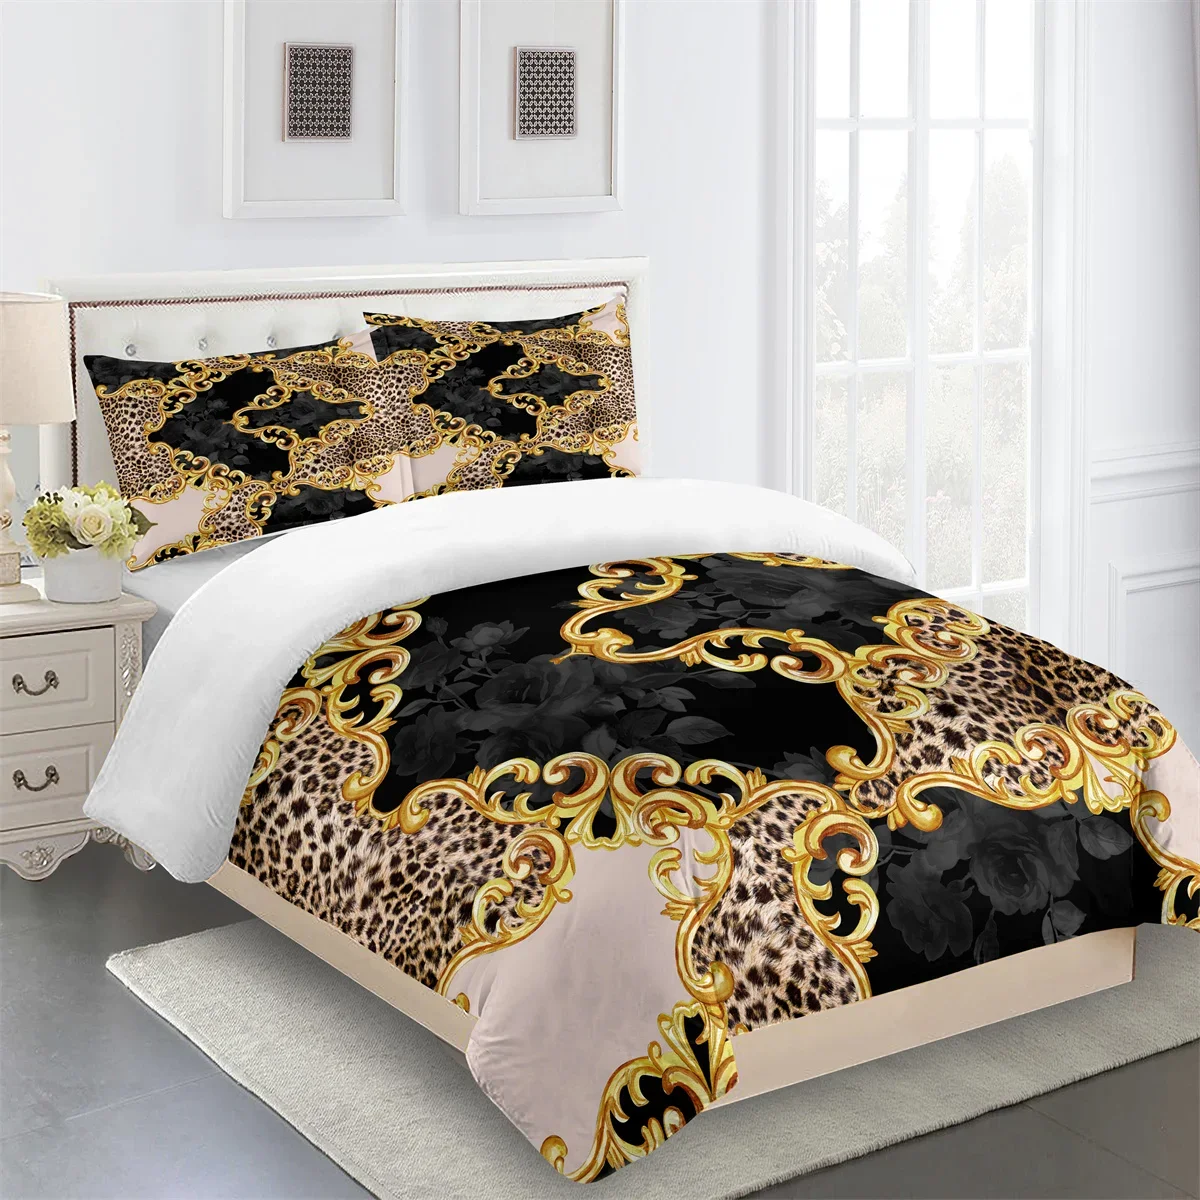 

Luxury Brand Vintage Leopard Baroque King Queen Twin Full Bedding Sets Single Double Bed Duvet Cover Set and 2 pcs Pillow cover